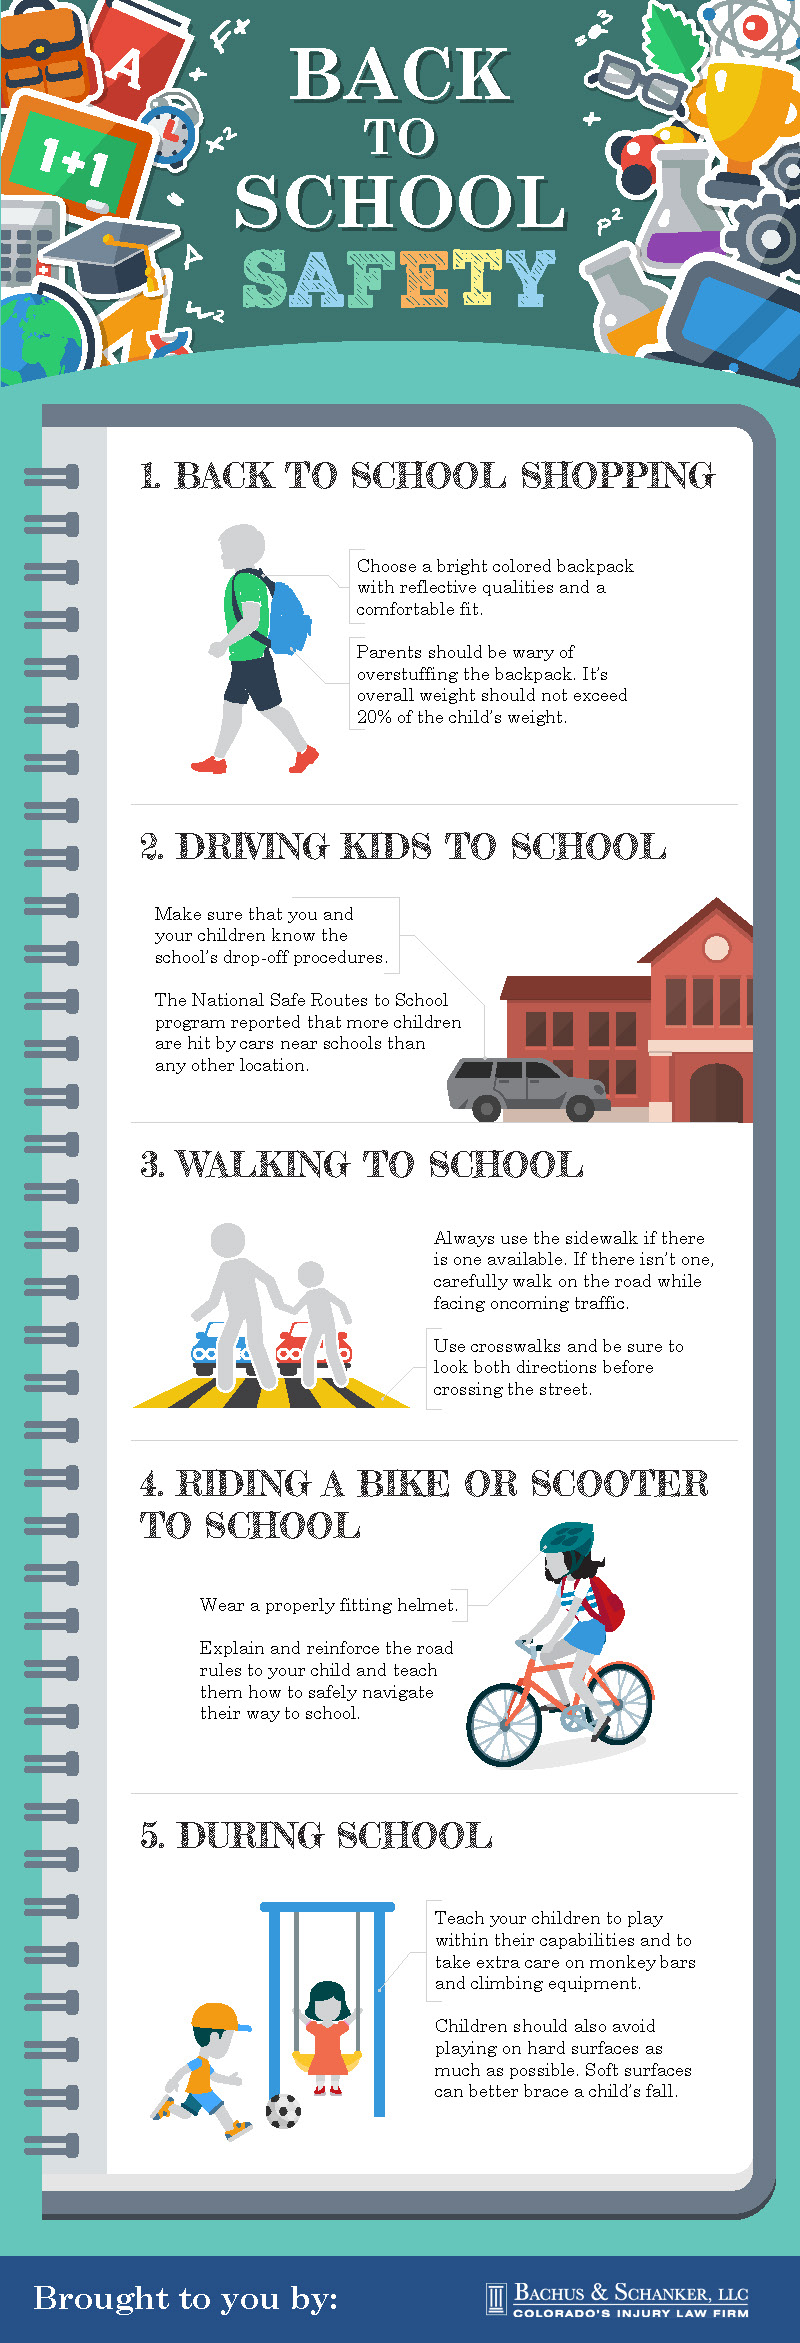 back-to-school-safety-infographic